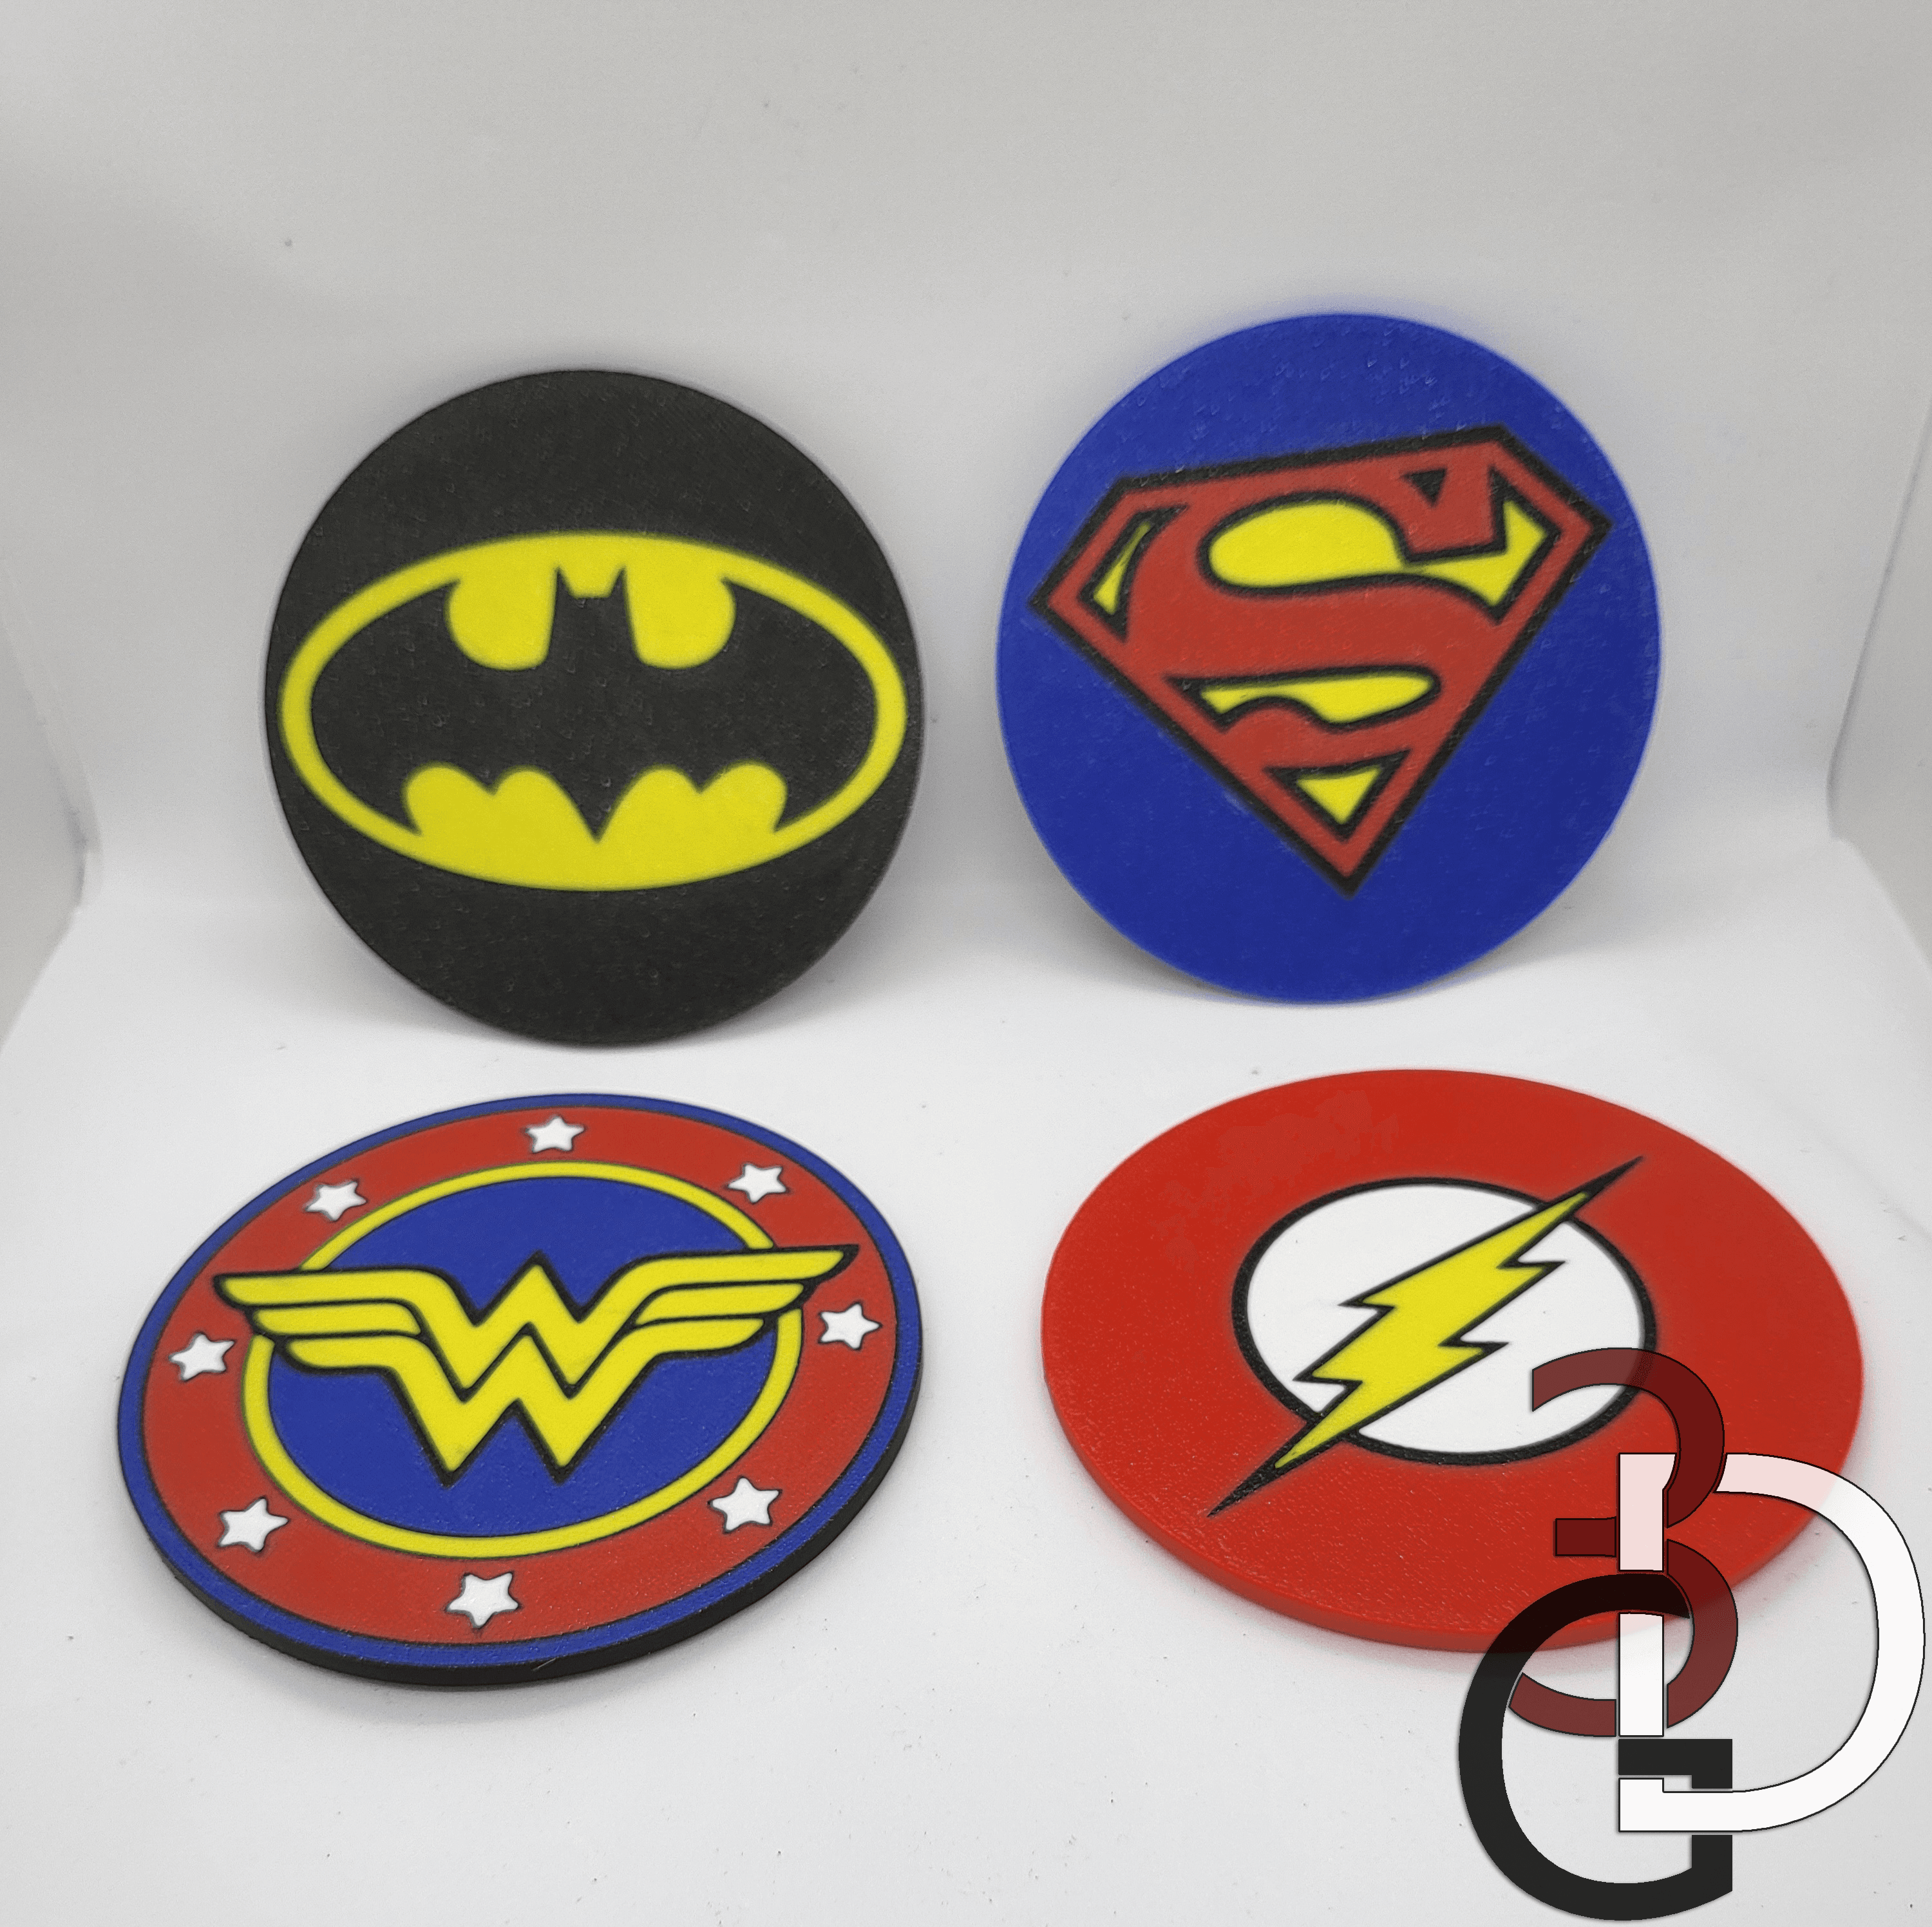 DC themed magnets/coasters 3d model